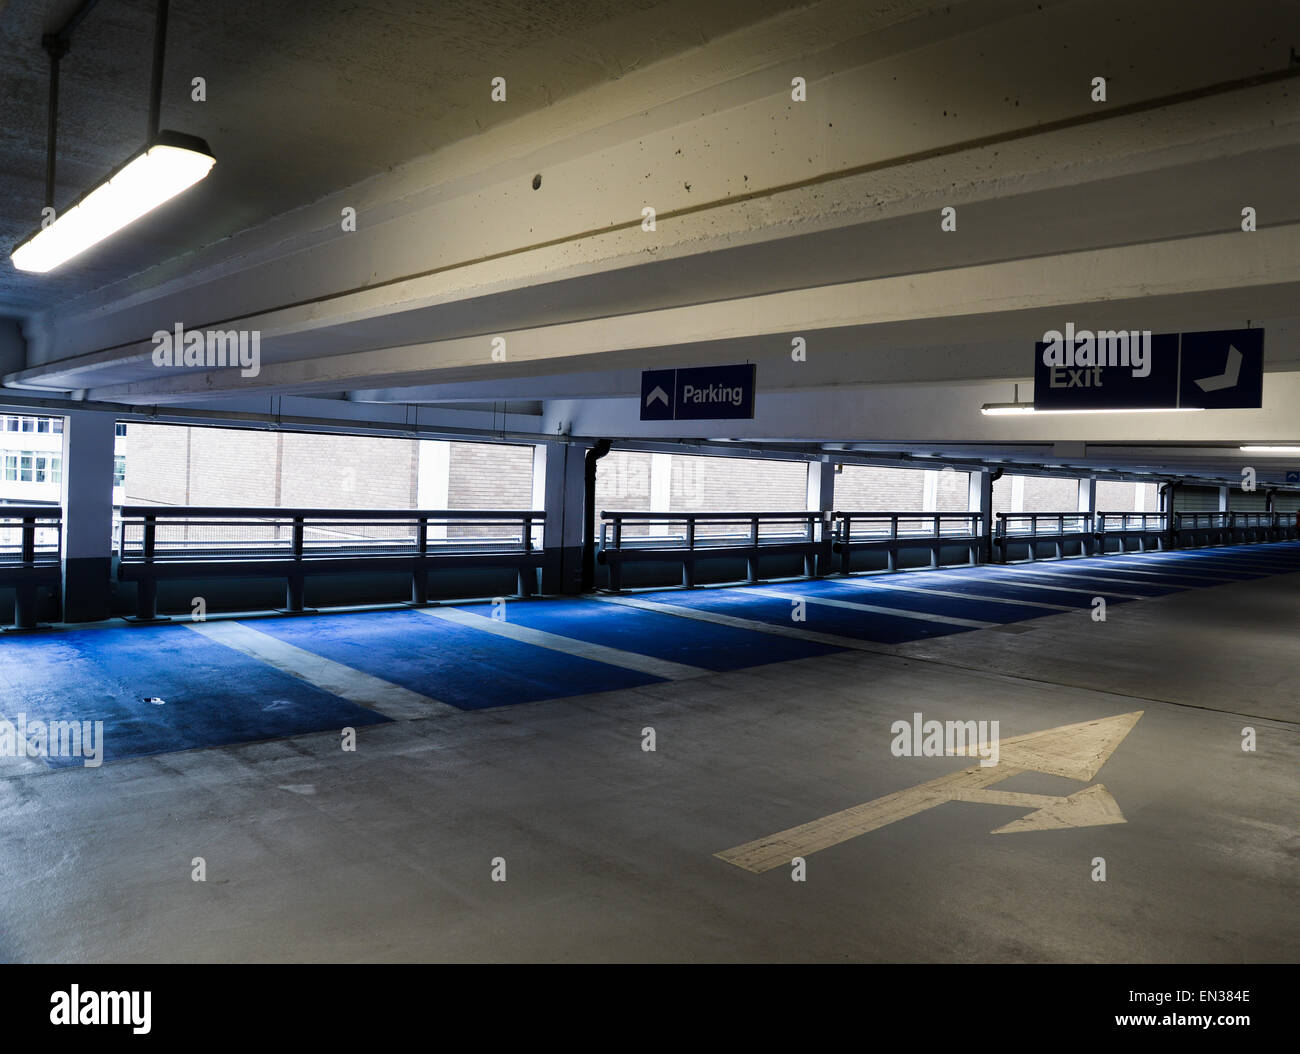 Empty parking bays in a multi storey car park Stock Photo